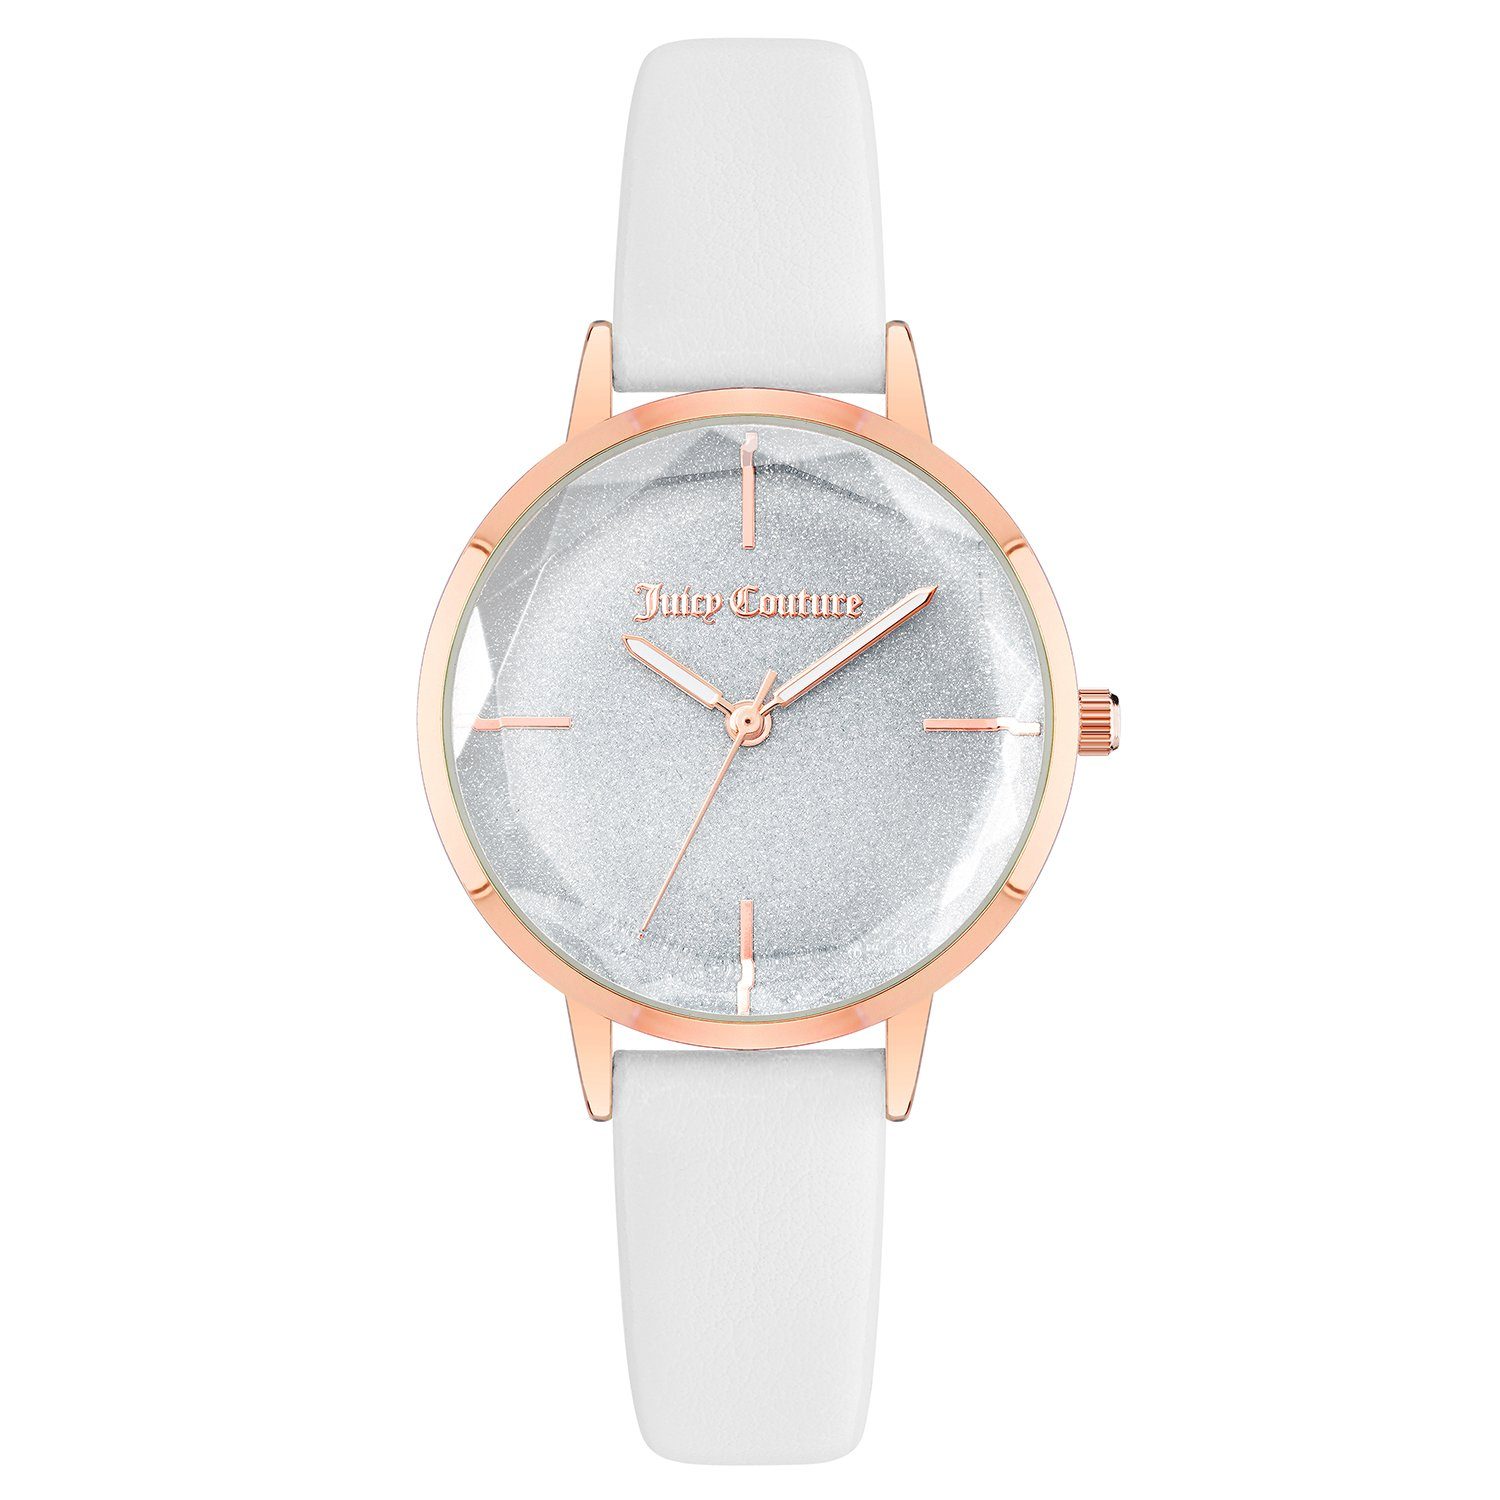 Juicy Couture Digitaluhr JC/1326RGWT